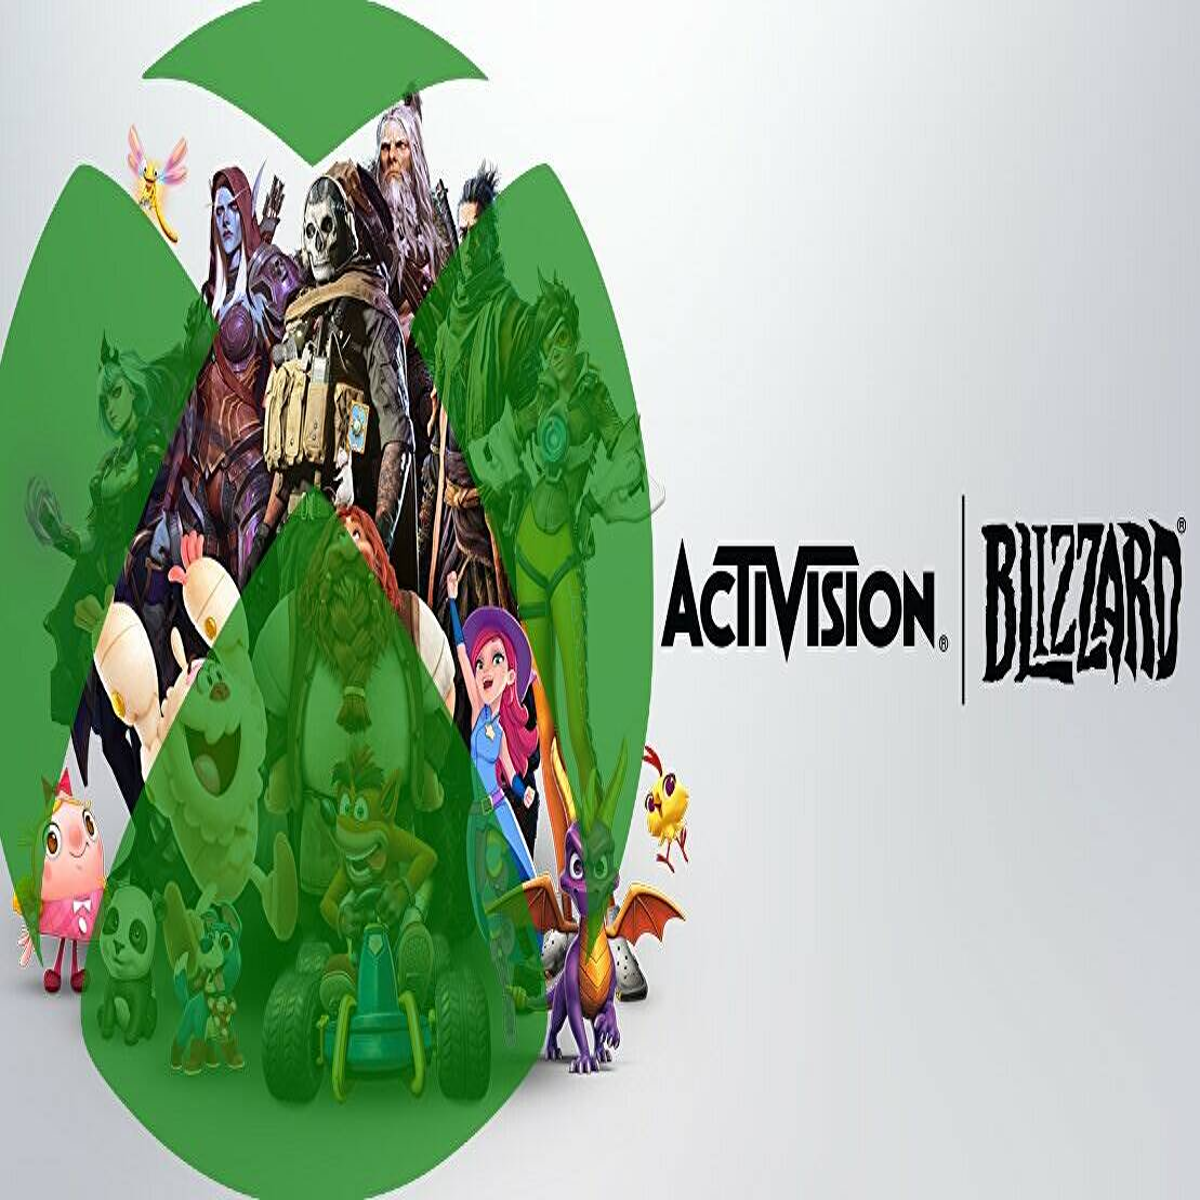 FTC sues to block Microsoft's takeover of video game maker Activision  Blizzard